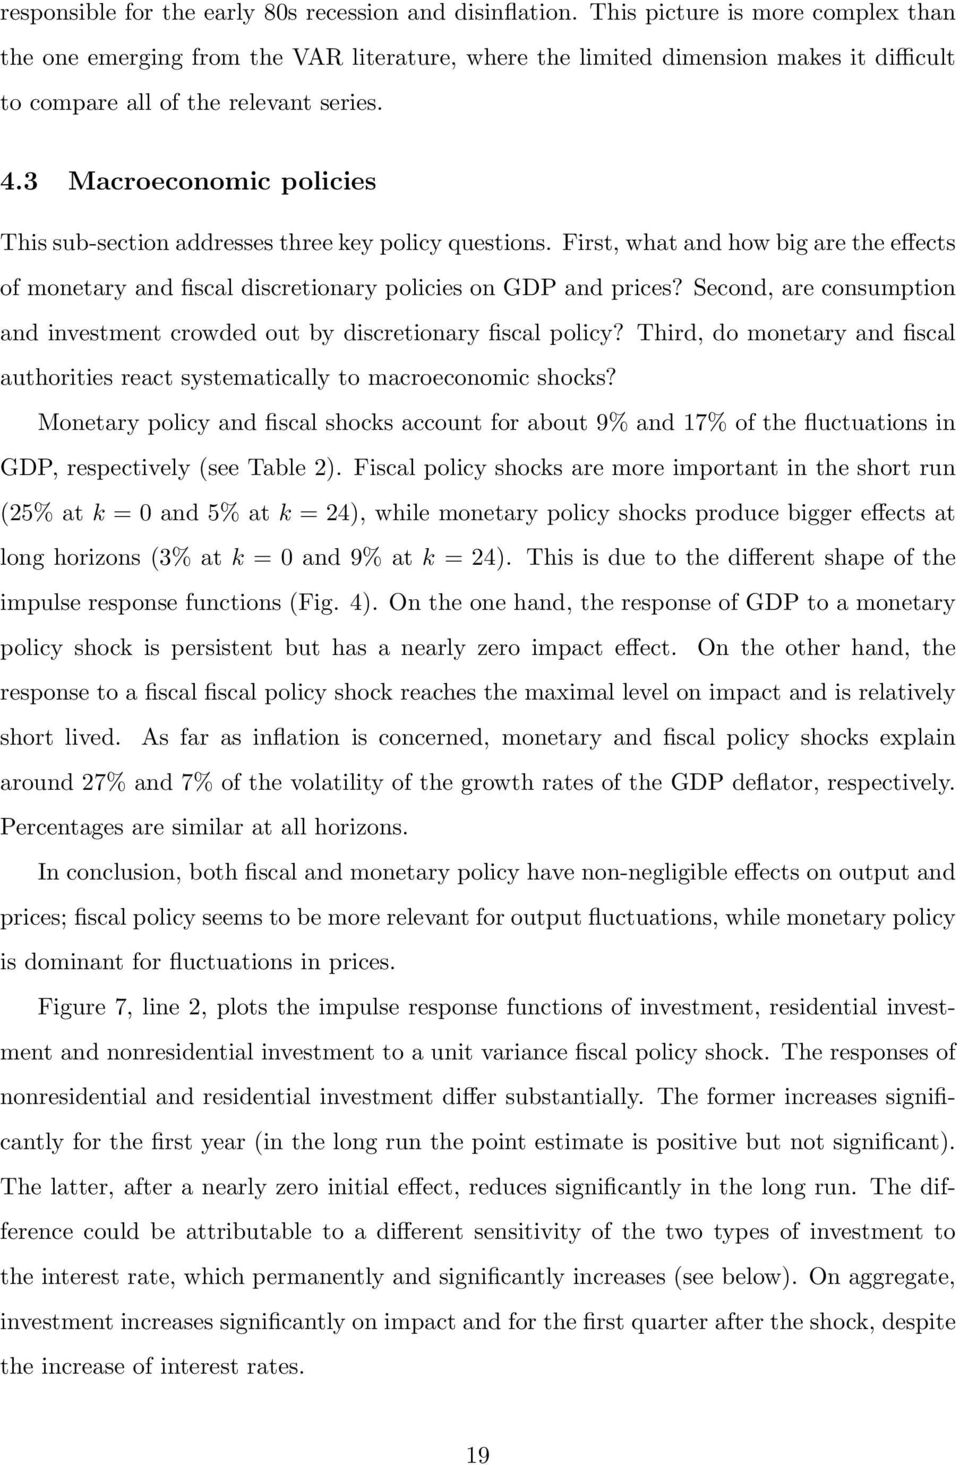 3 Macroeconomic policies This sub-section addresses three key policy questions. First, what and how big are the effects of monetary and fiscal discretionary policies on GDP and prices?